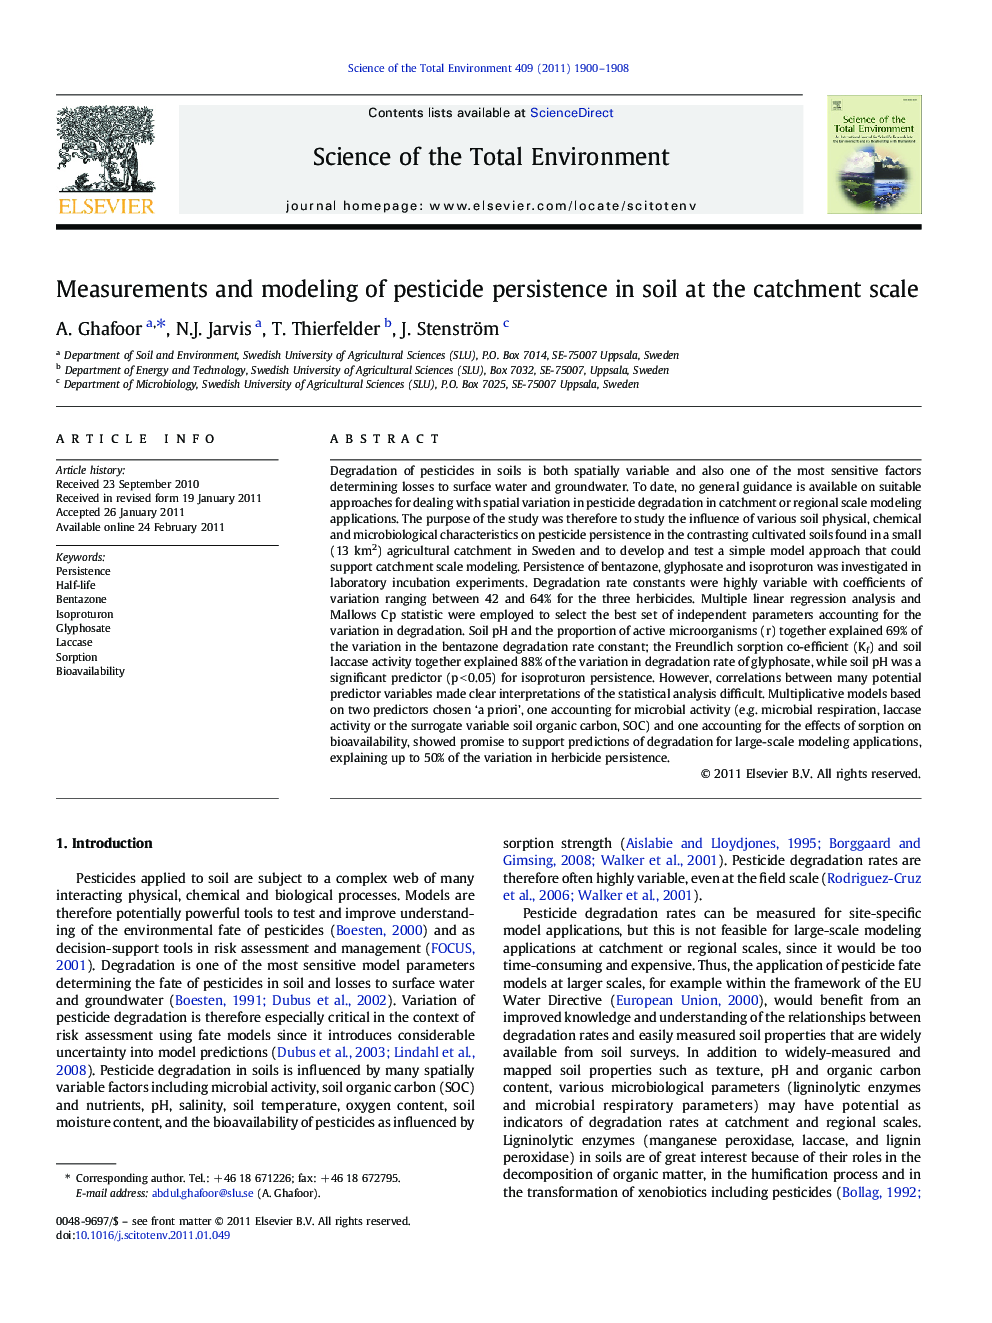 Measurements and modeling of pesticide persistence in soil at the catchment scale